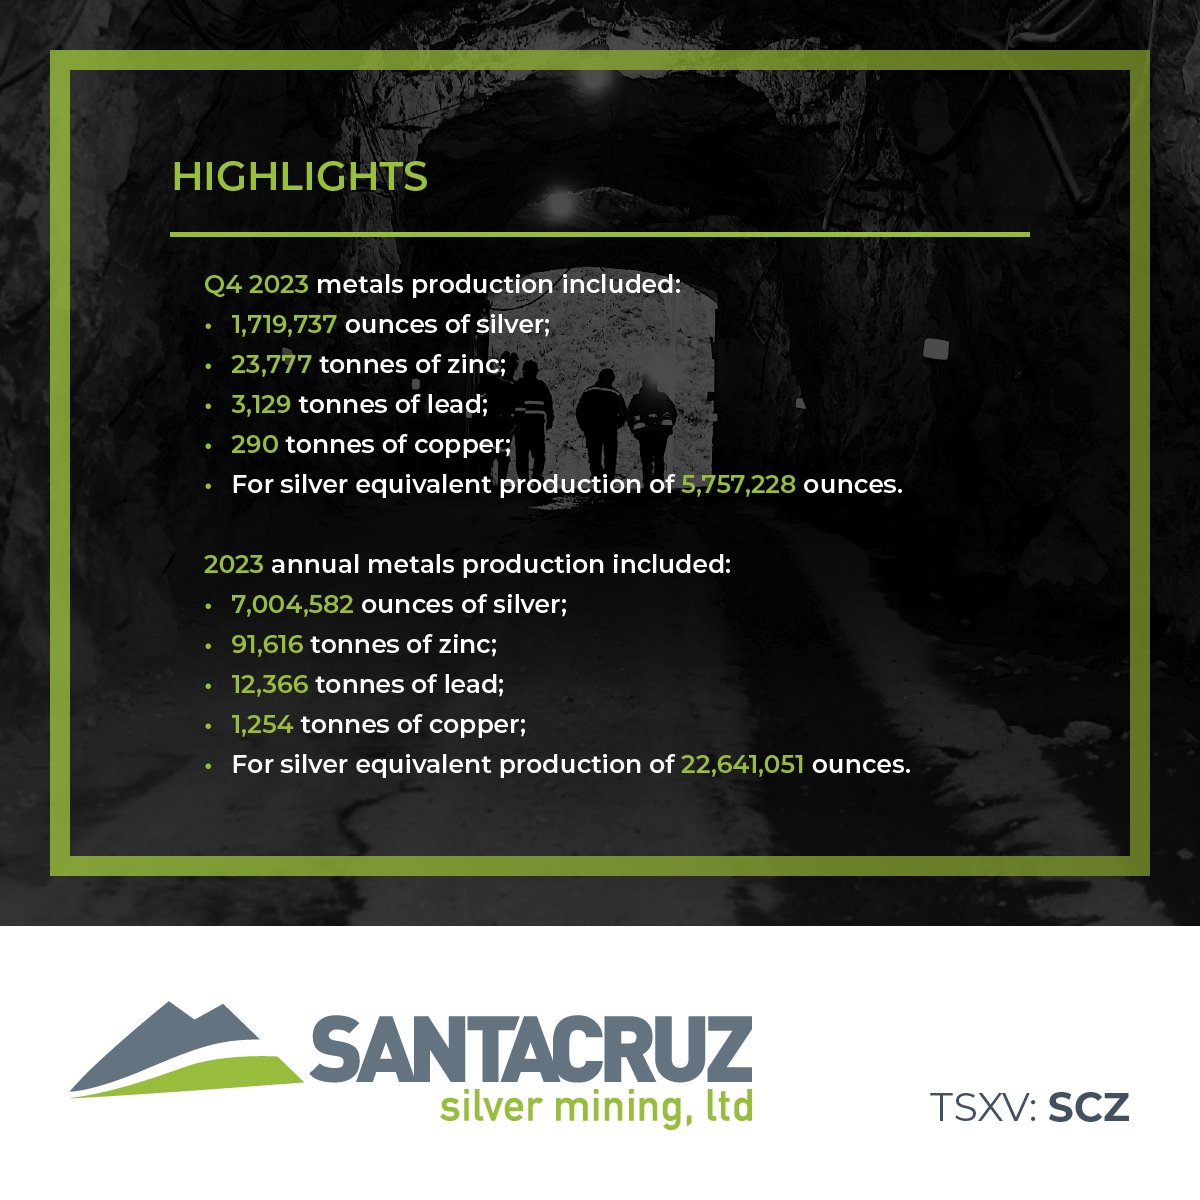 Santacruz Silver is pleased to share some highlights from our recent Q4 and annual 2023 production results.

Get all the details in the news release👇
bit.ly/48JvvW7

$SCZ #SilverMining #SilverProduction #MiningNews #MiningStocks #SilverInvesting #Mexico #Bolivia